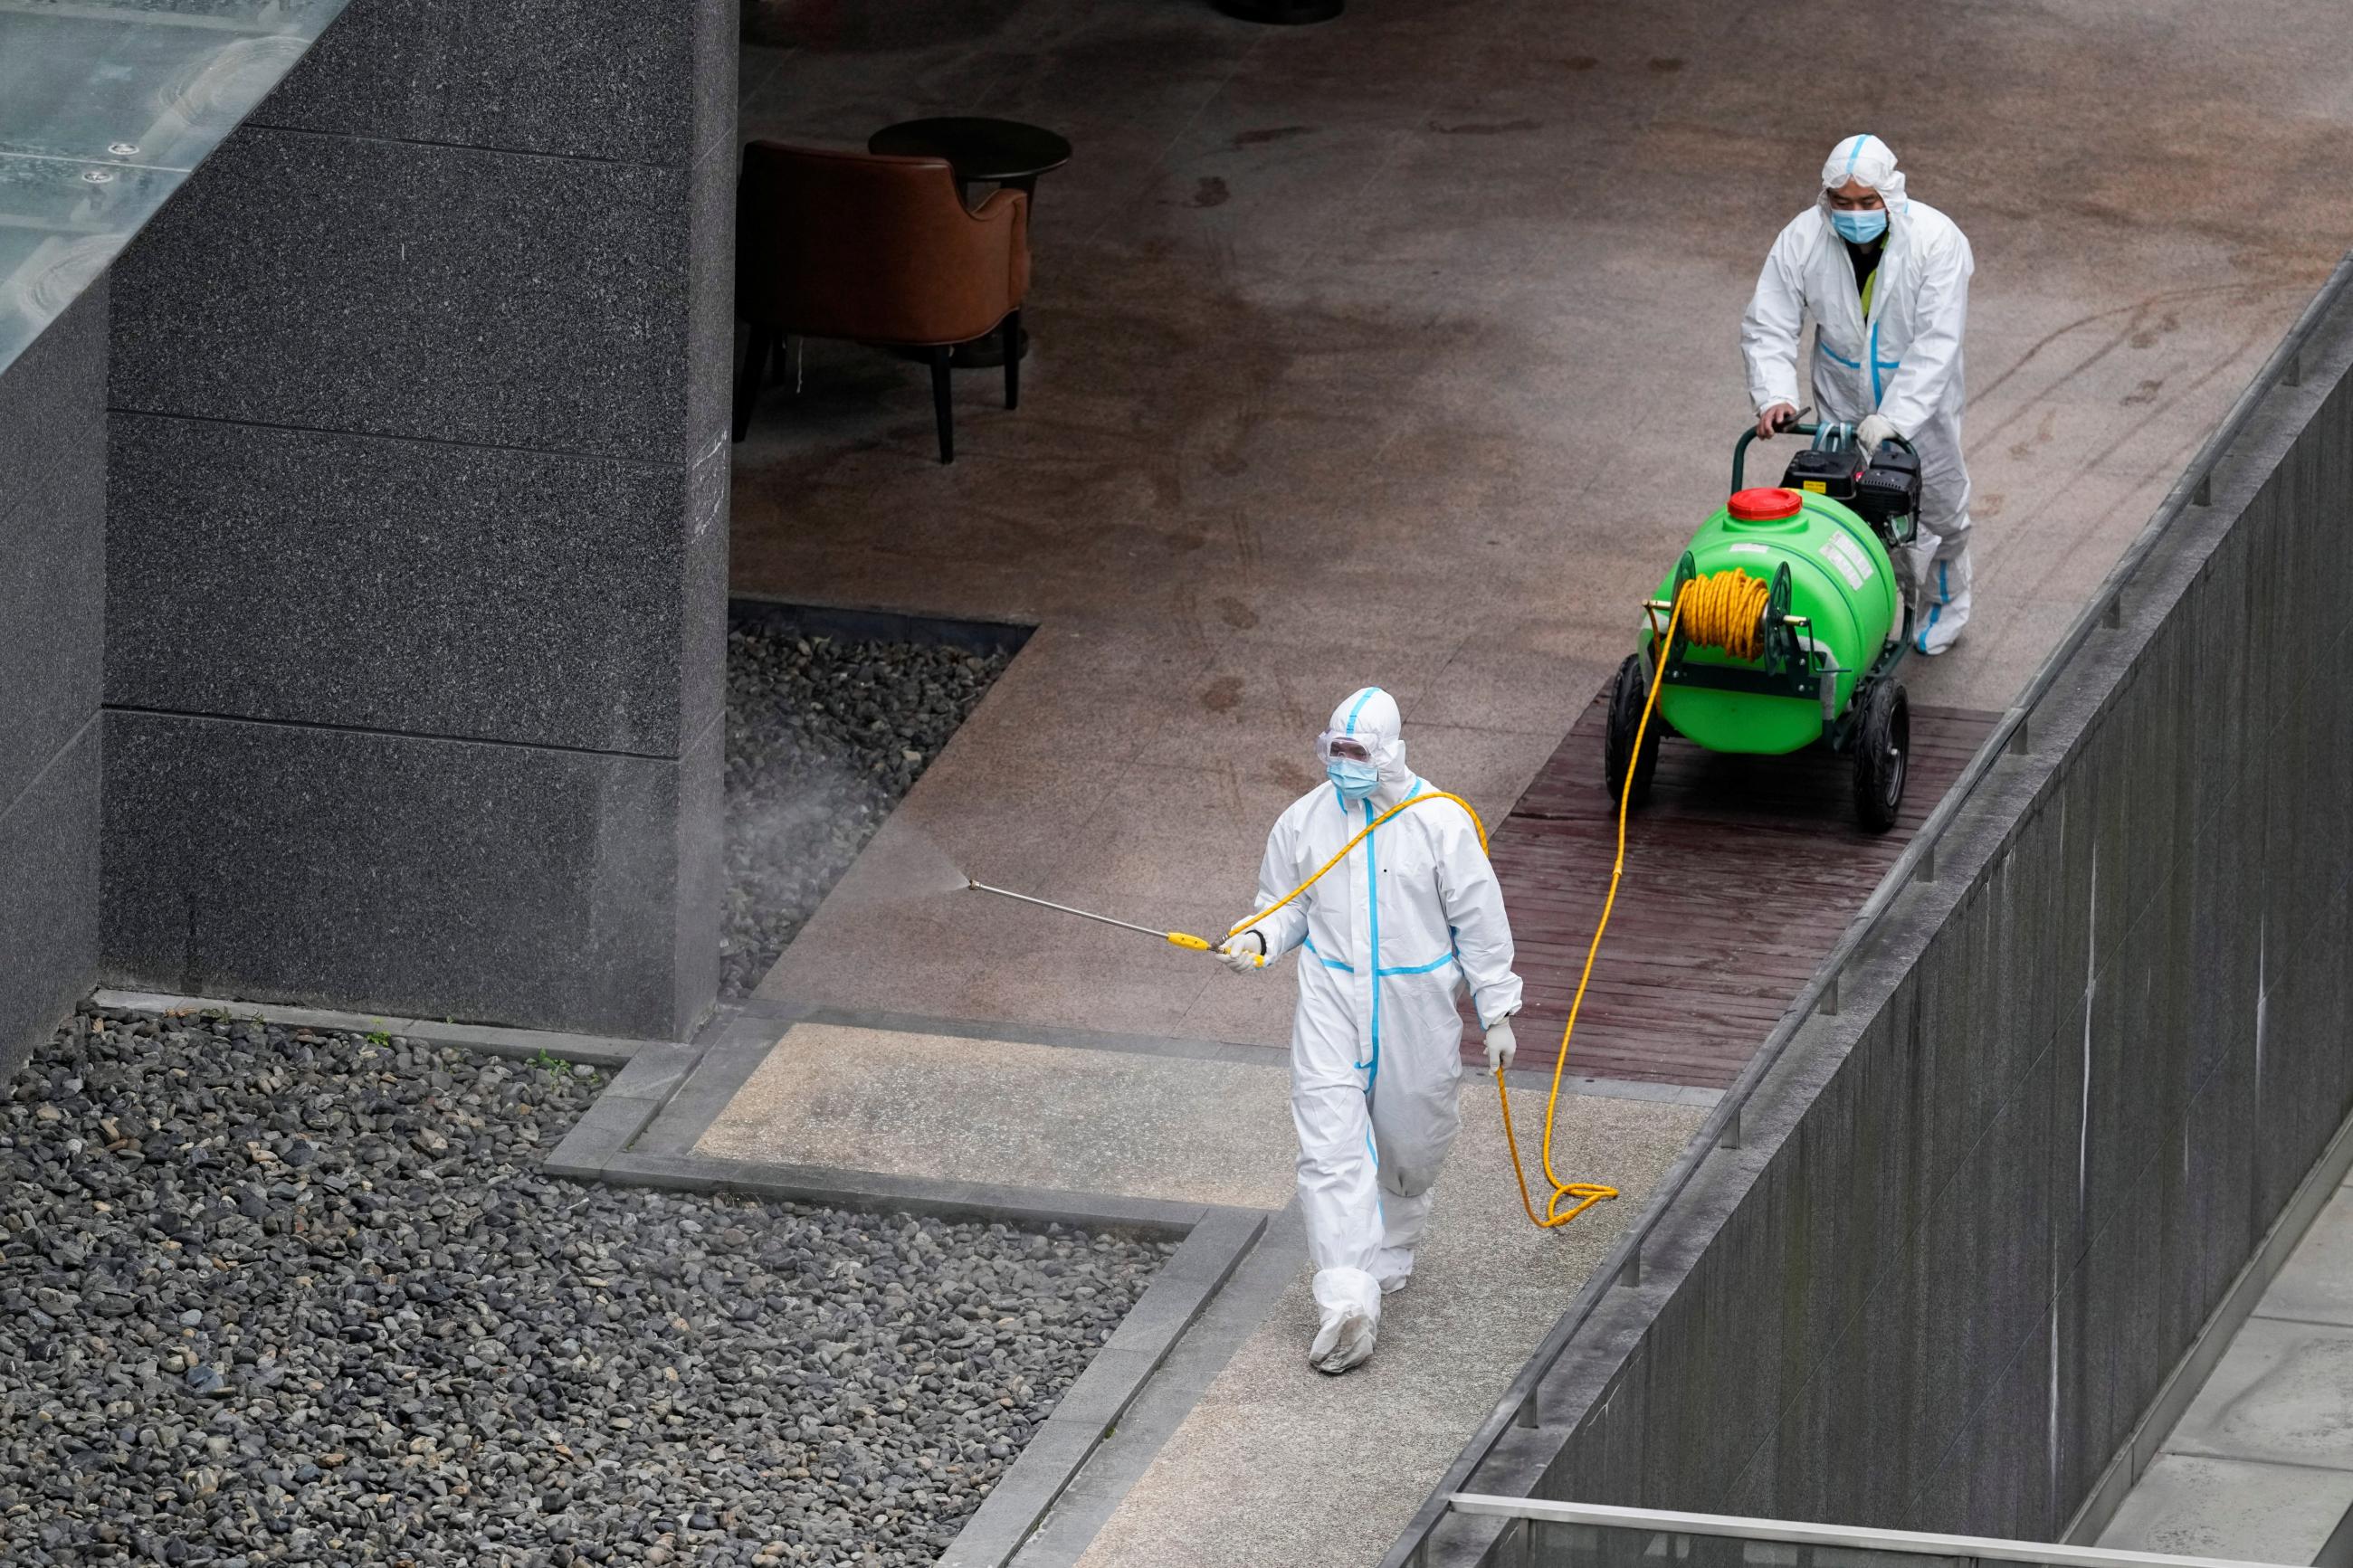 Workers in protective suit spray disinfectant at a community, during the lockdown to curb the spread of the coronavirus disease (COVID-19) in Shanghai, China, April 5, 2022.